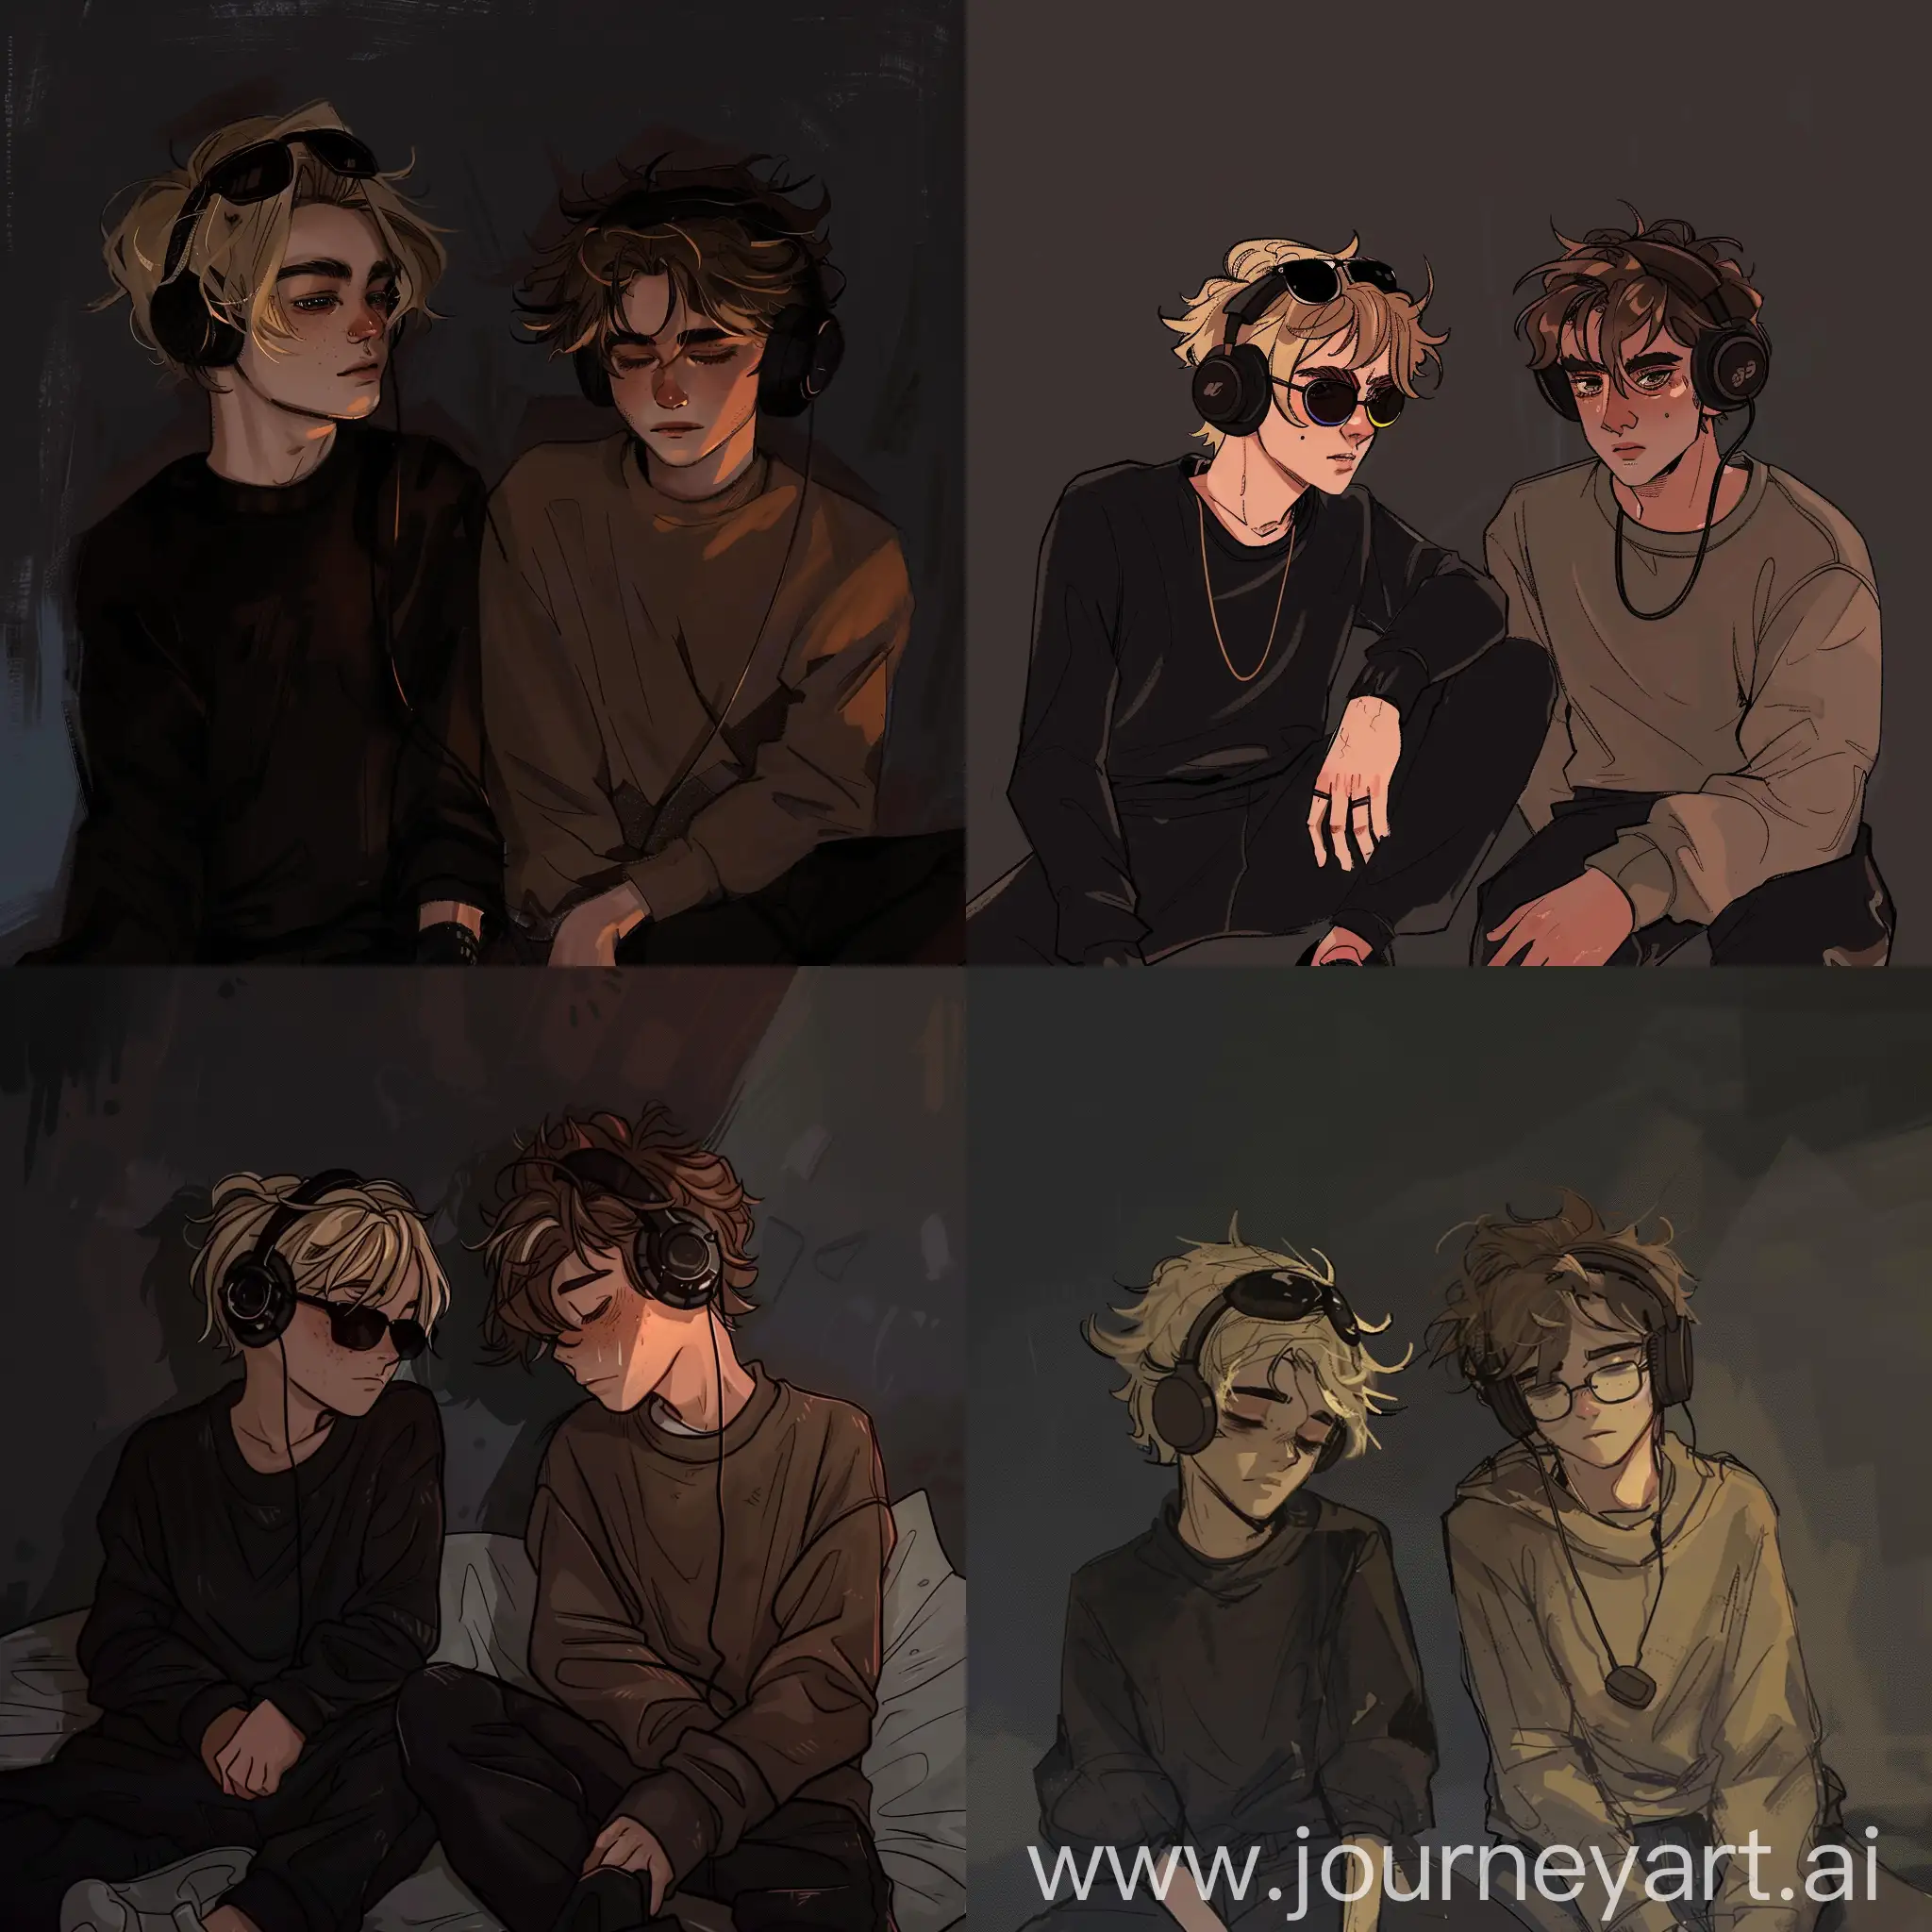 dark theme, two teenagers, drawing, two boys, night, the boy staying on the left is blonde wearing black outfit and with sunglasses on his forehead; the one on the right is wearing sweatshirt with brown messy hair and with headphones, animated drawing